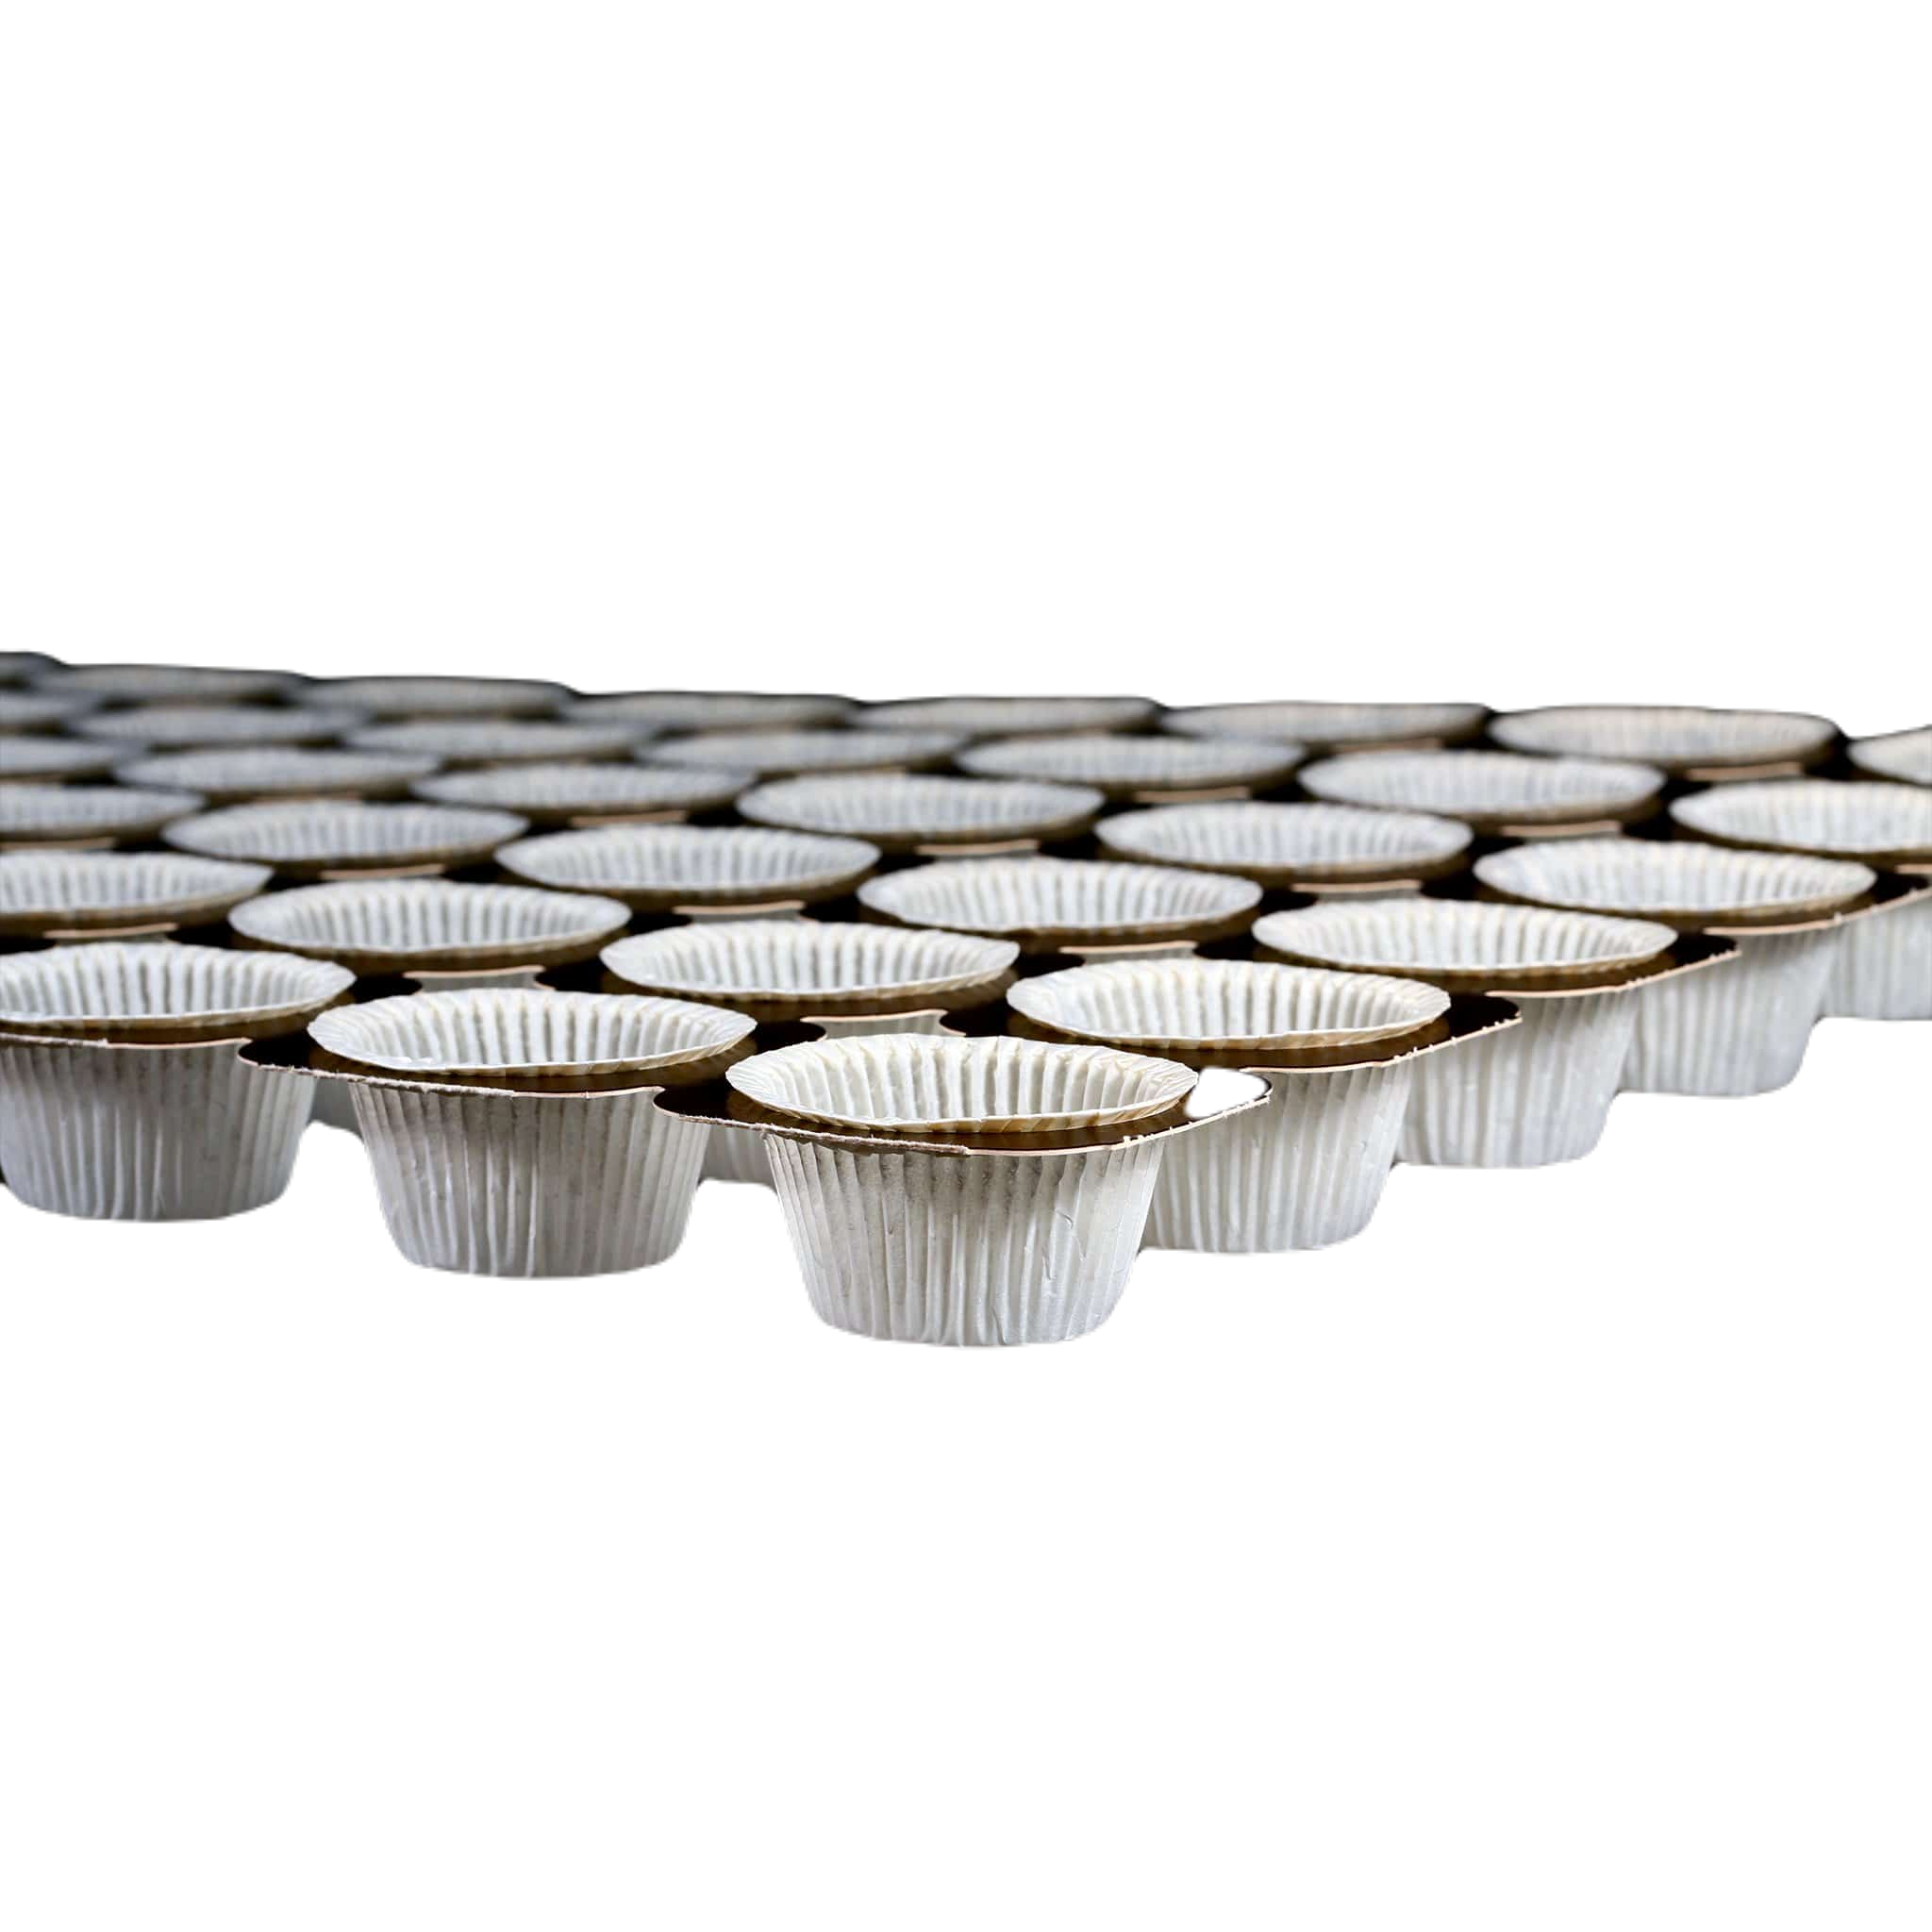 125 Sheets Italian Muffin Tray, 4 Oz - hotpack.bh